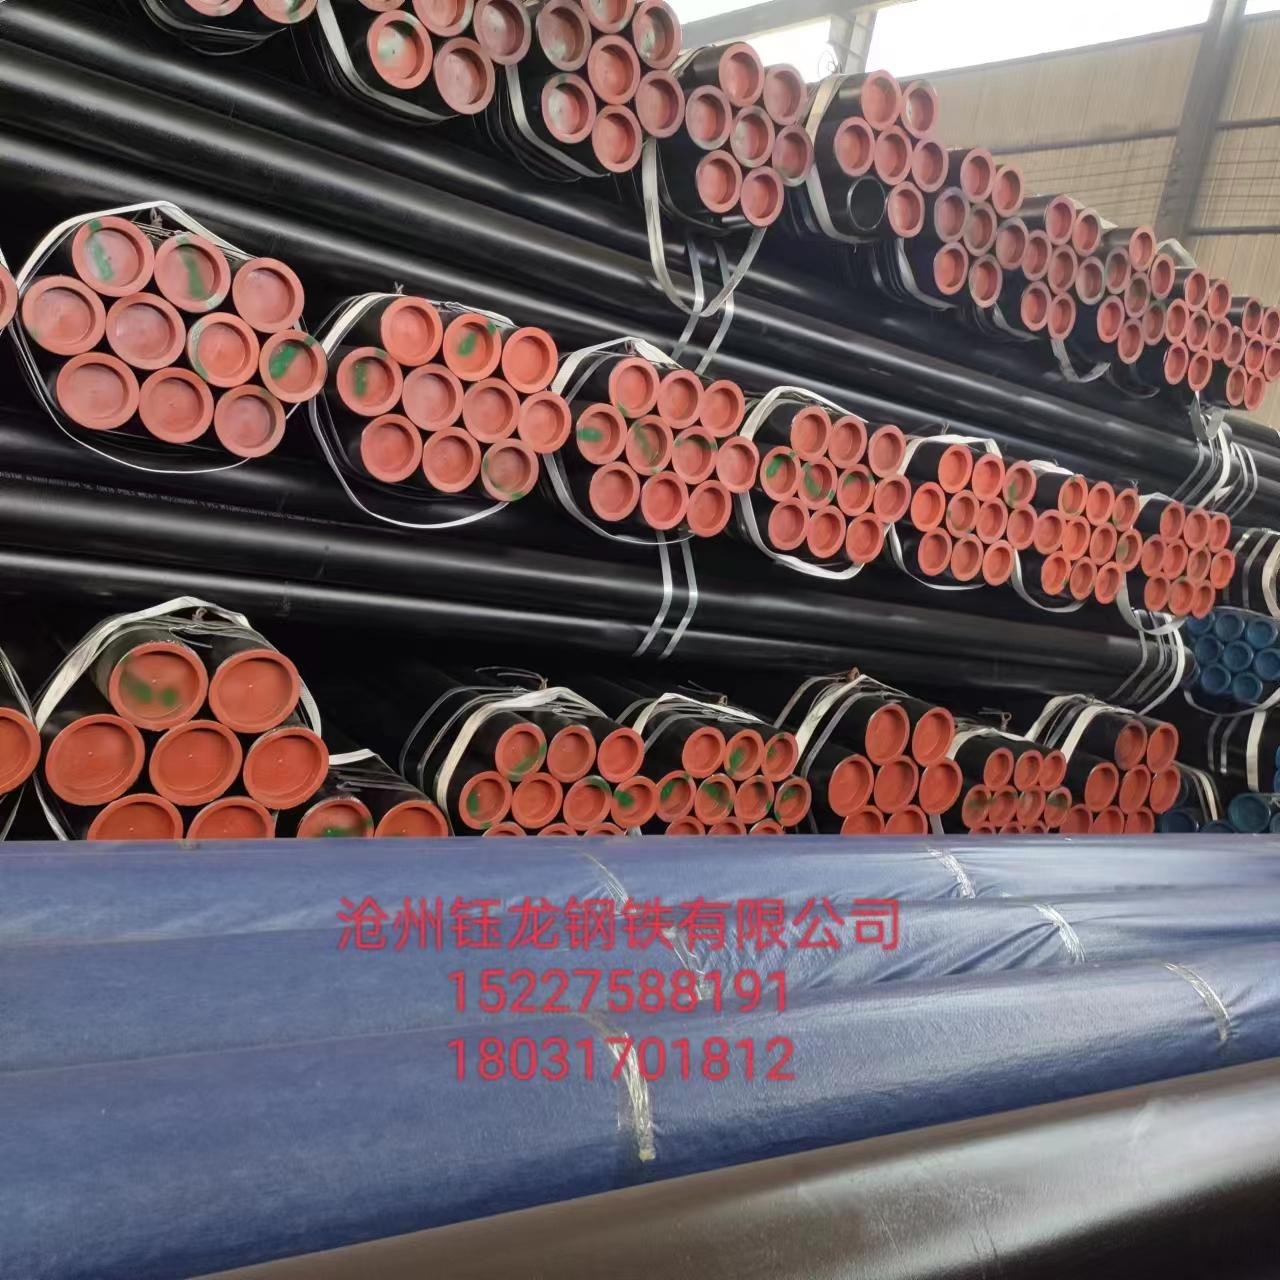 Liaocheng 20# foreign trade US standard seamless pipe 4